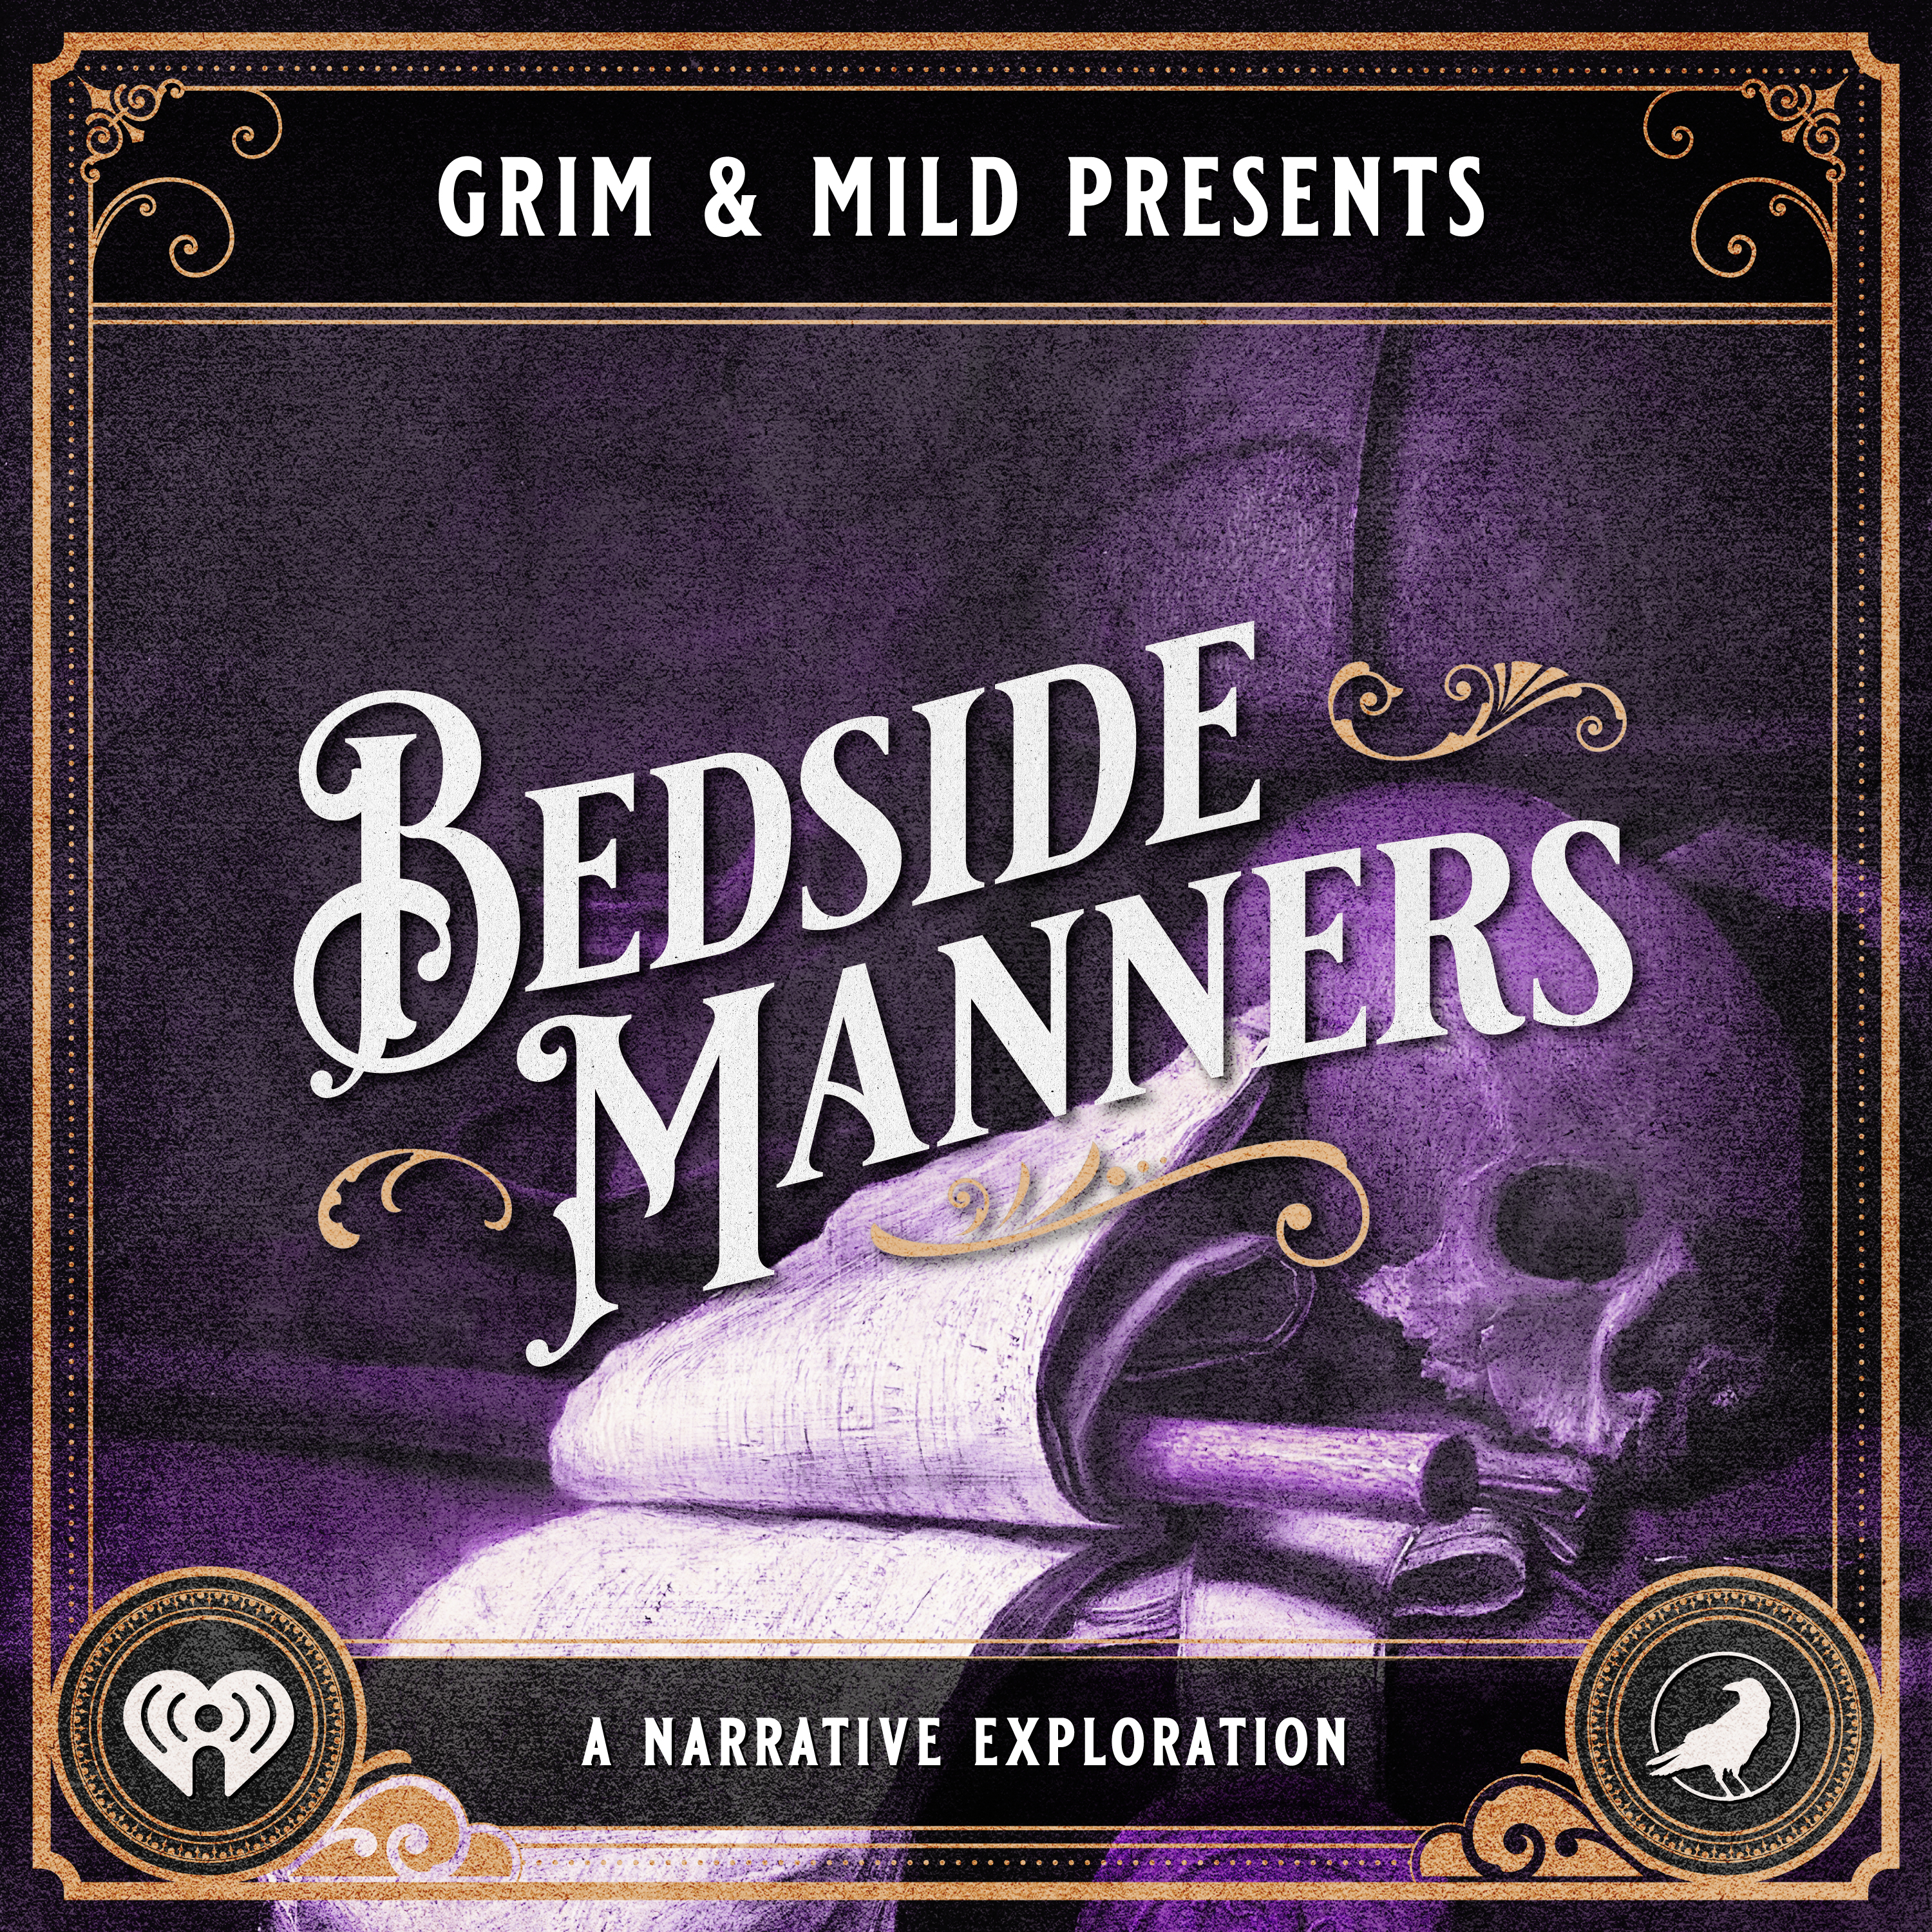 Bedside Manners 13: The End?